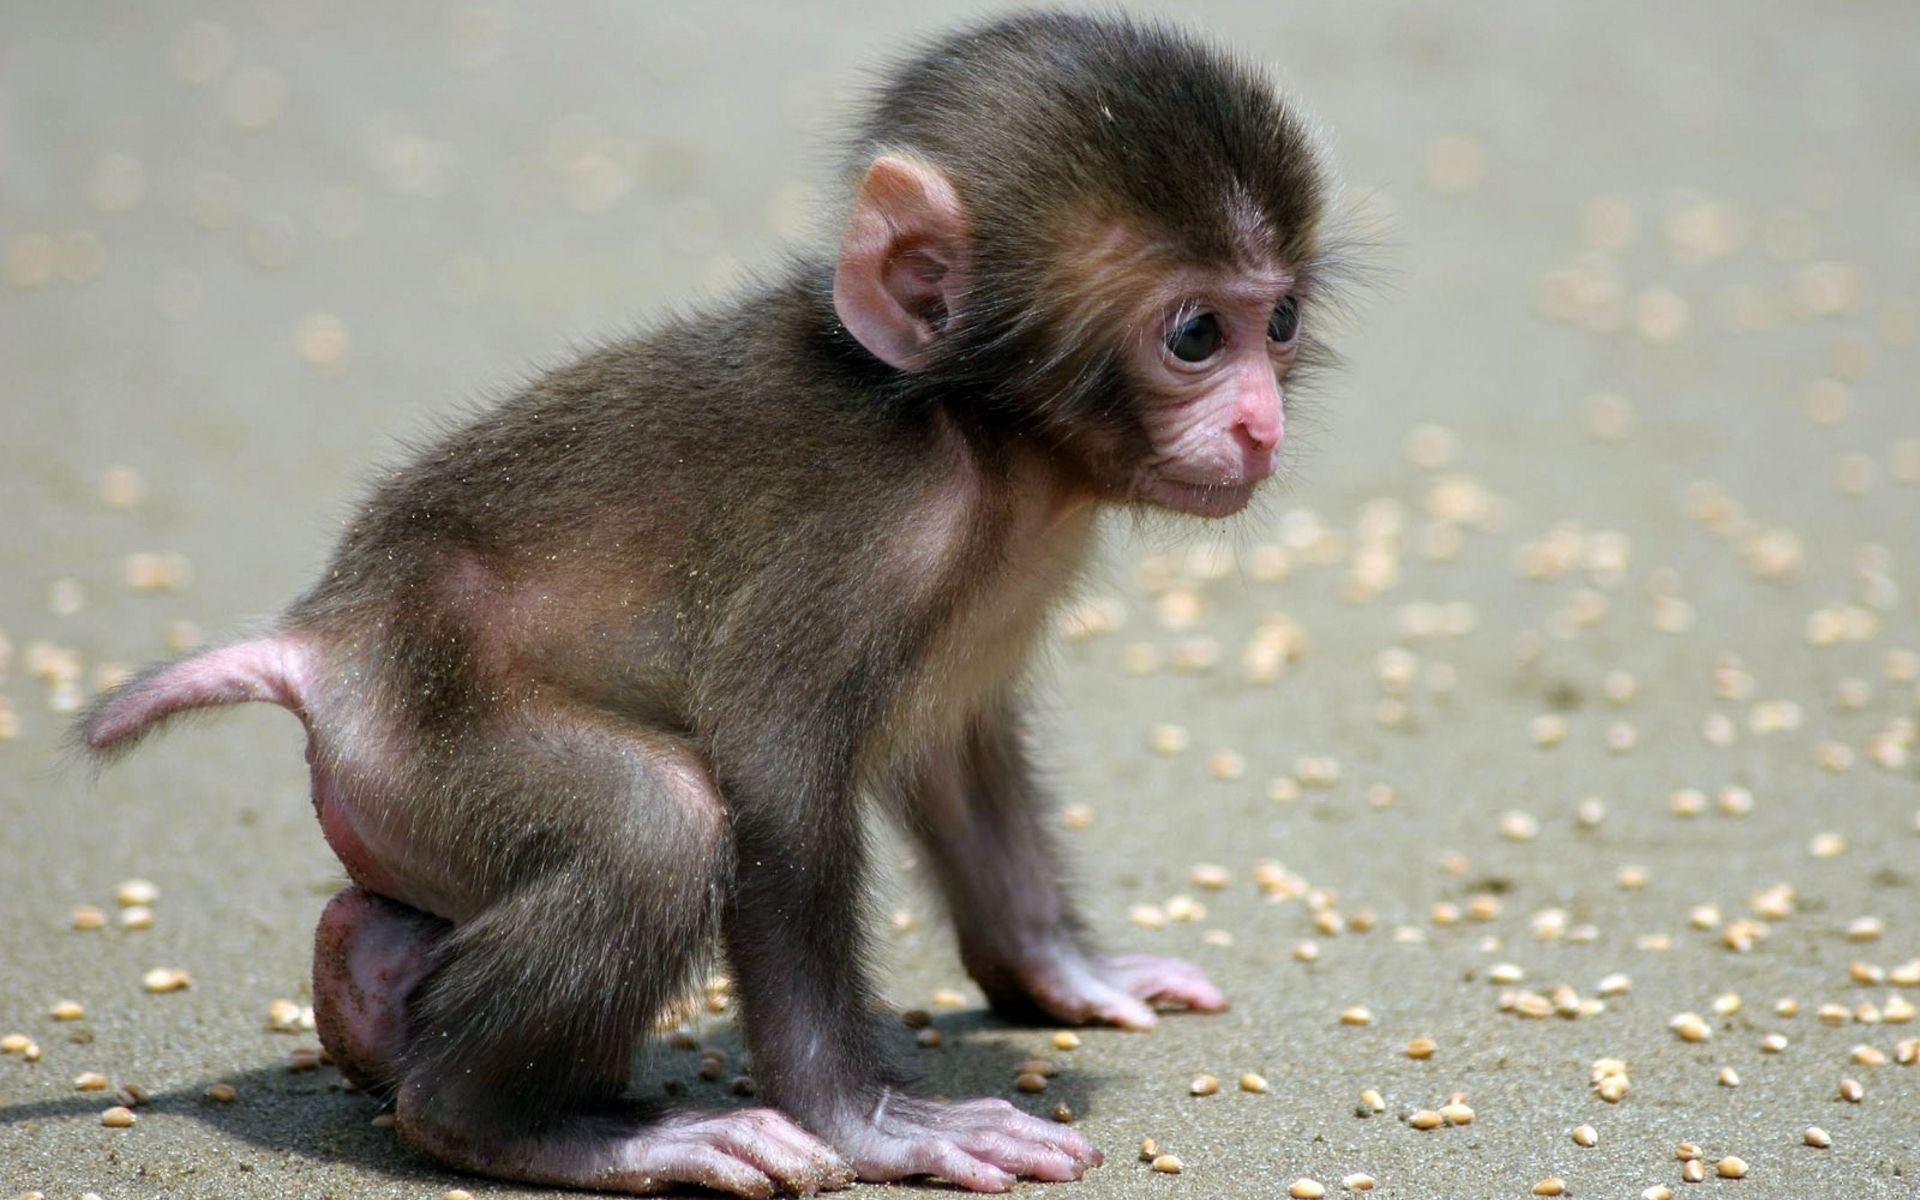 Lovely Small Monkey Baby Picture HD Wallpaper Of Animal